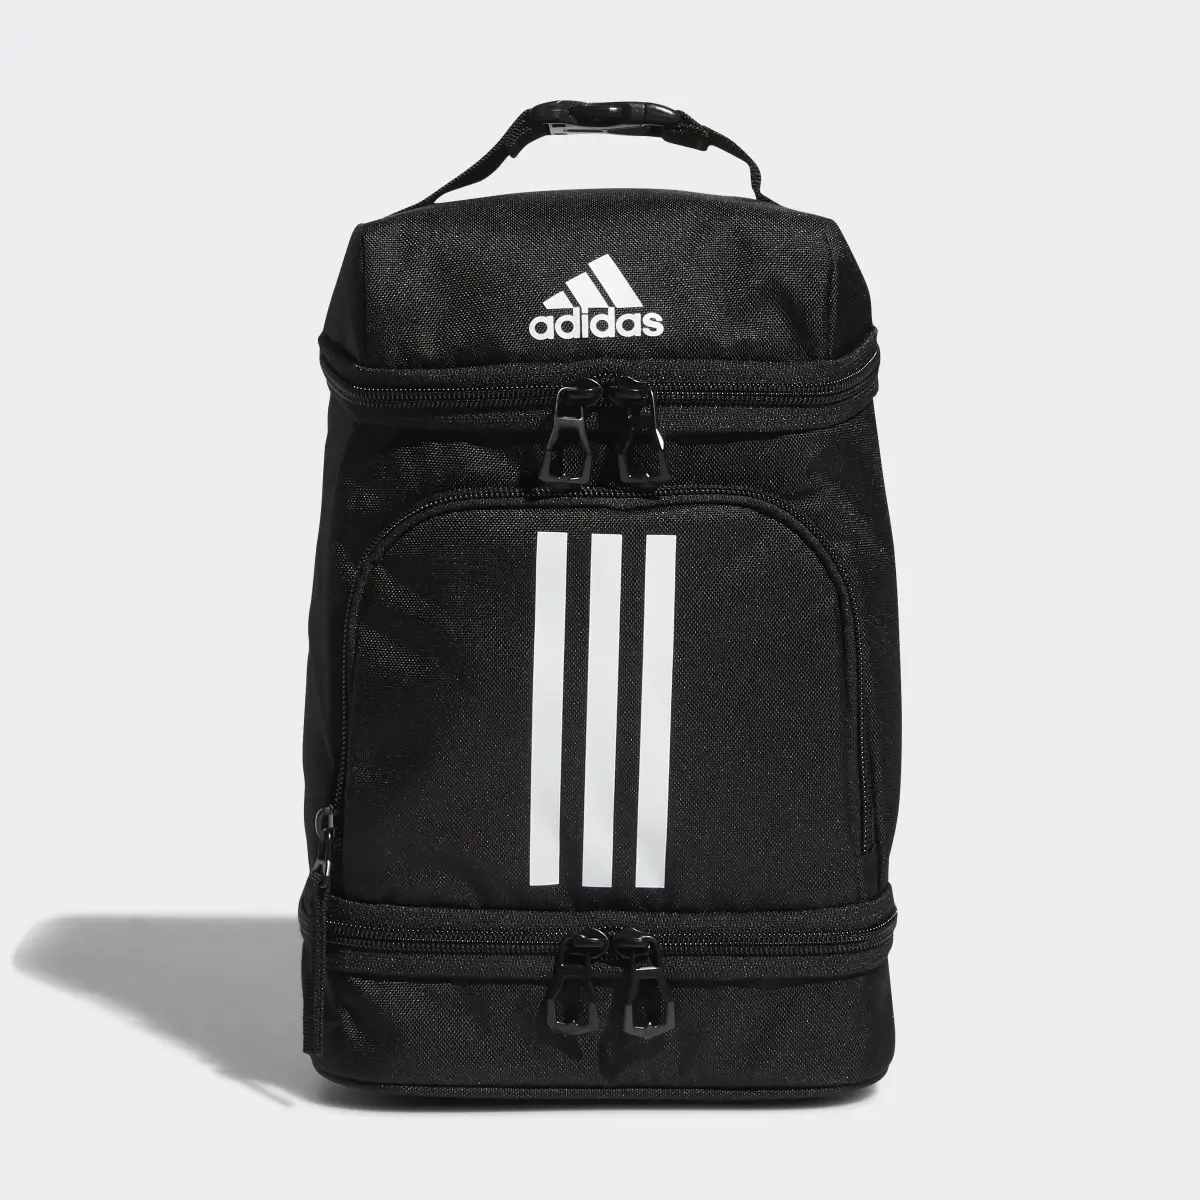 Adidas Excel Lunch Bag. 2